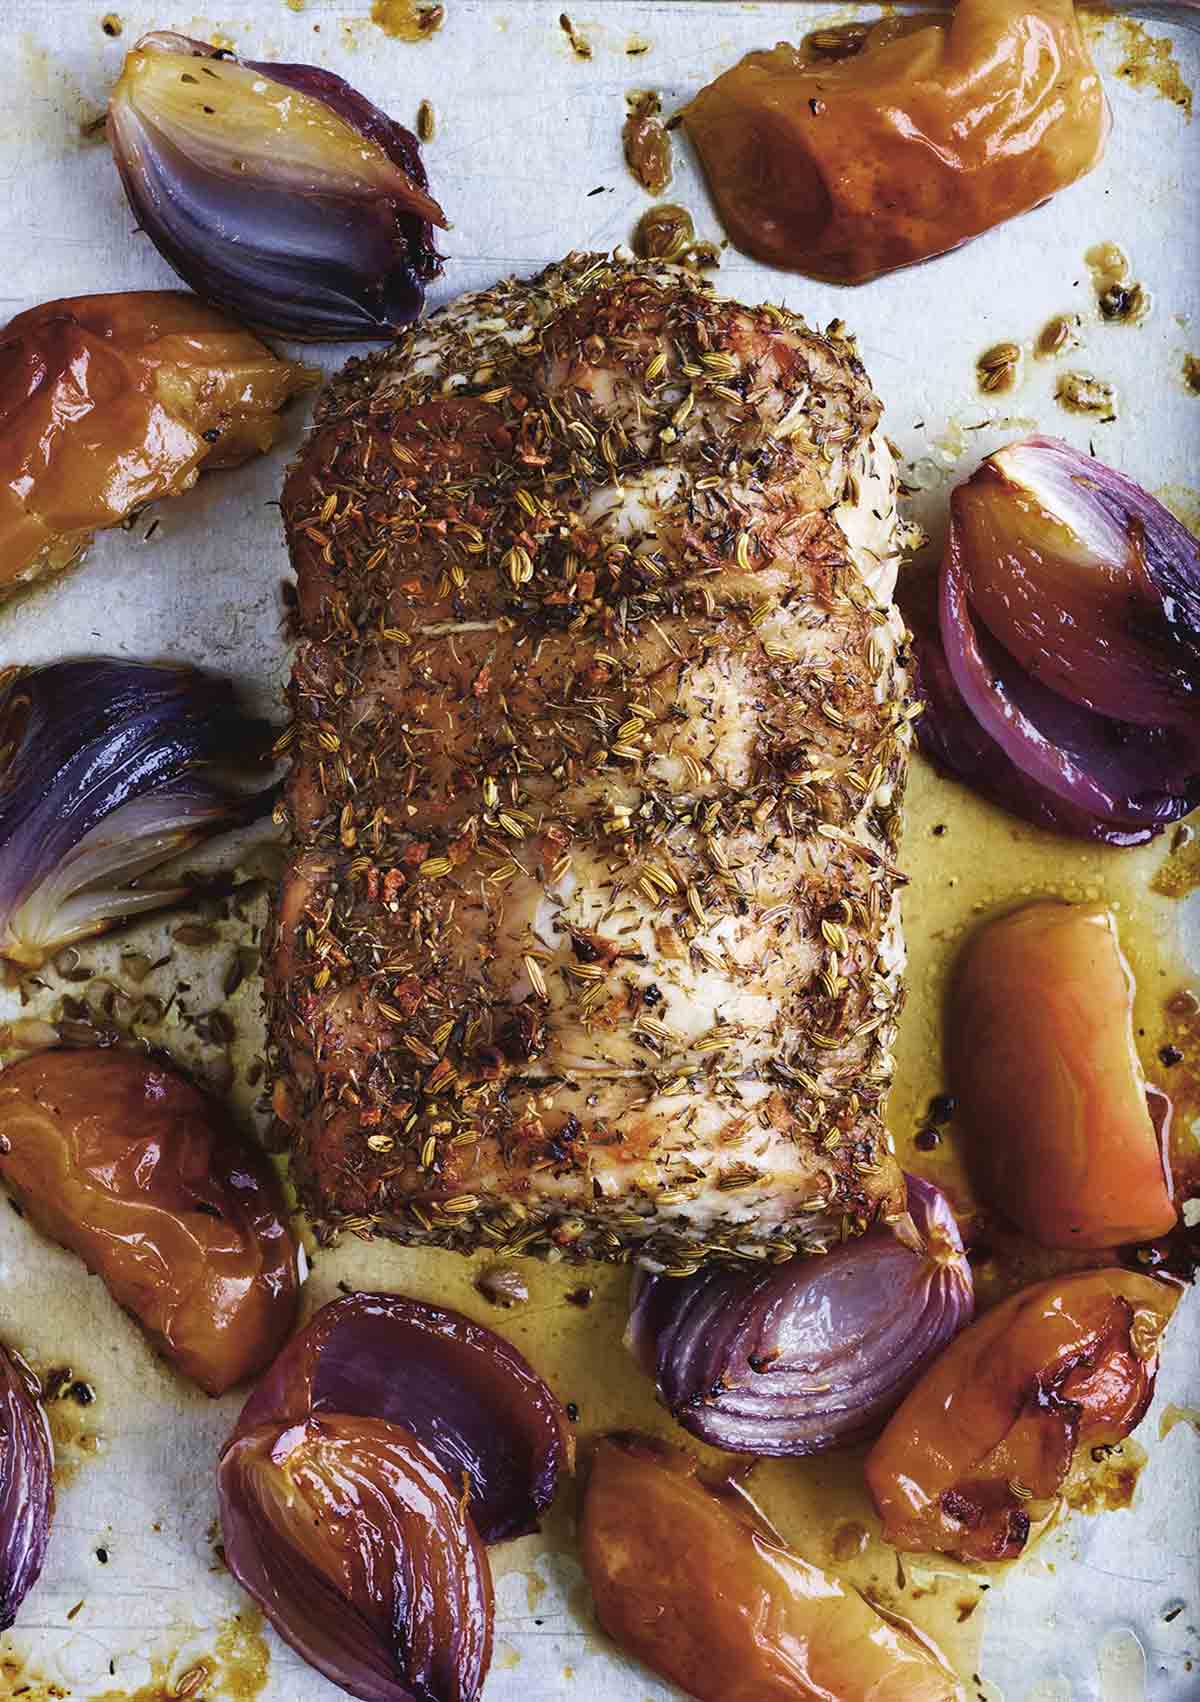 A roast pork loin with apples and onions scattered around it on a baking sheet.